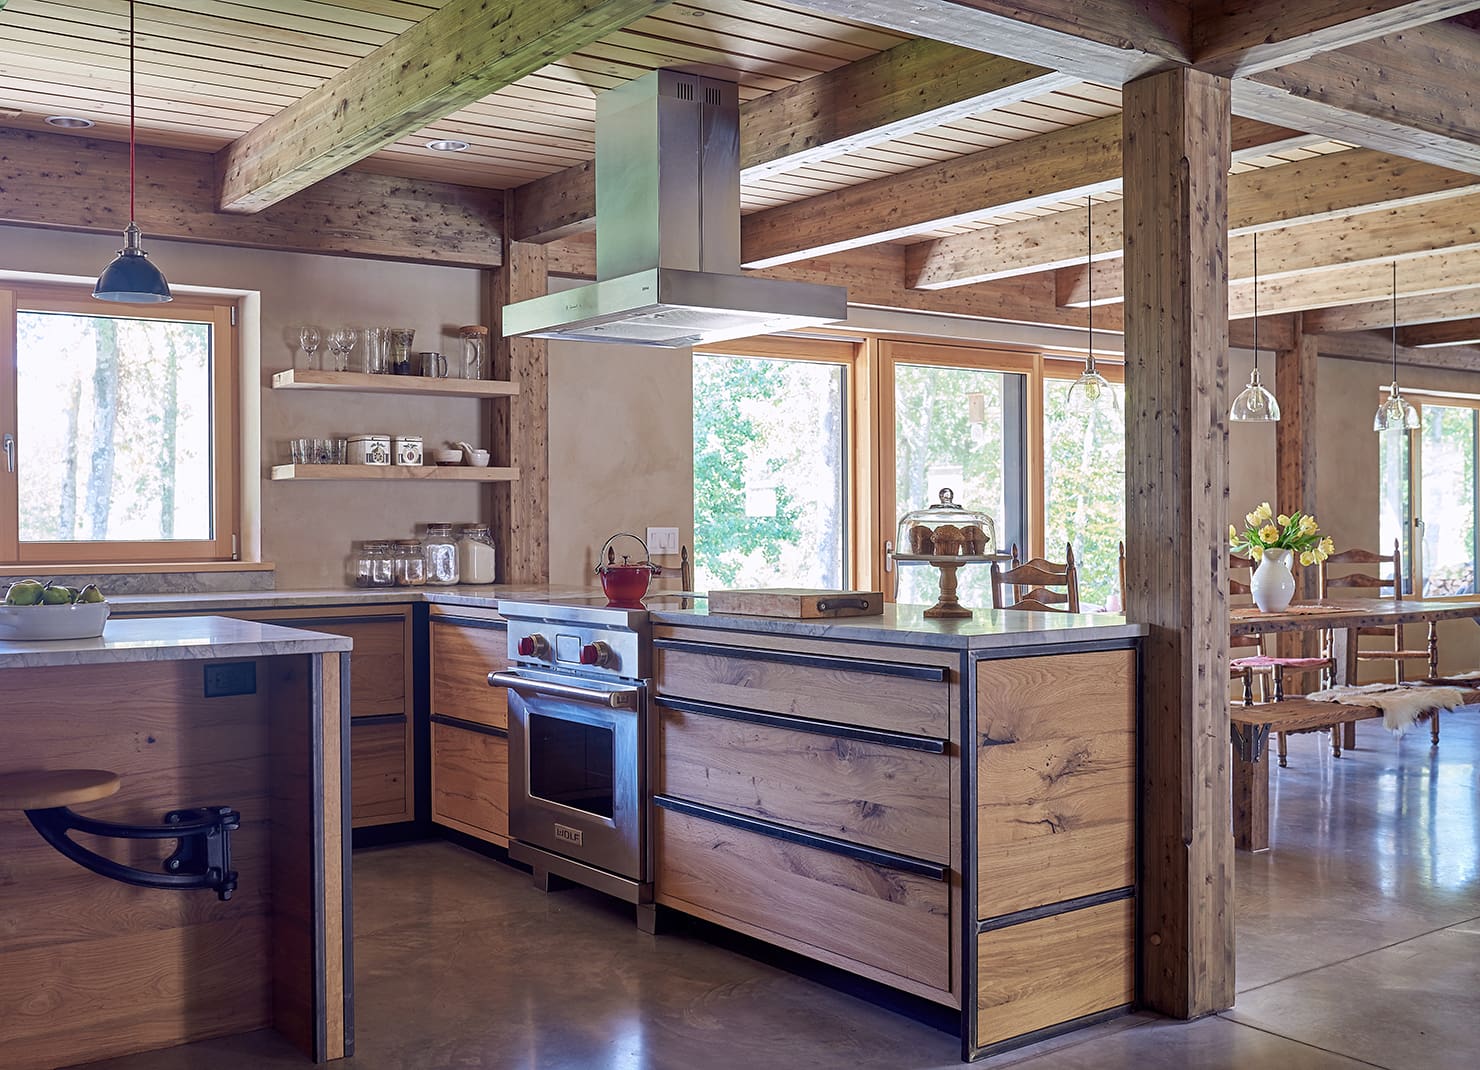 A rustic kitchen